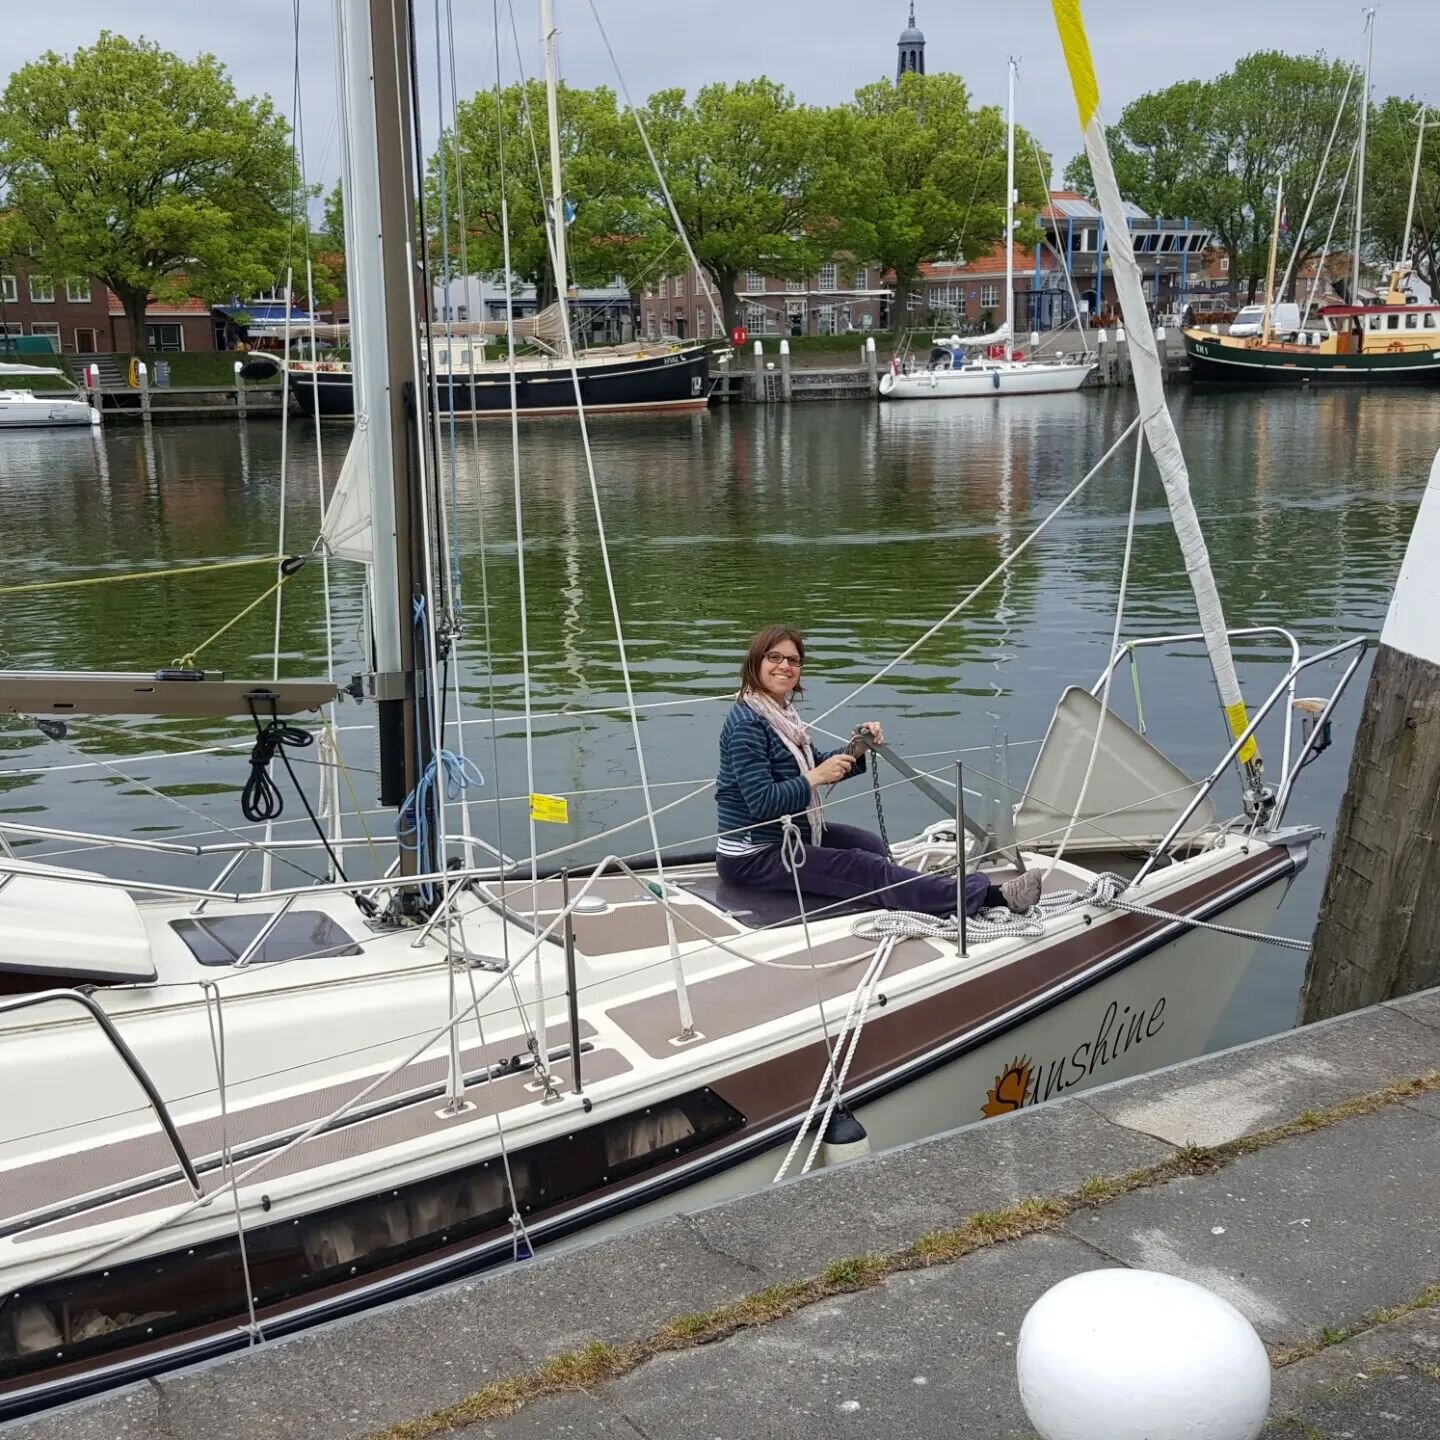 5 years ago:
Same Girl, Same harbor #buitenhavenenkhuizen 

Today:
Boat grew: from 24ft to 42ft
Girls grew
They can even do the boat Jobs in the Mast 💪
.
.
.
#prouddad #proudmom #enkhuizen #sailing #bavaria24 #contest42 #boatkids